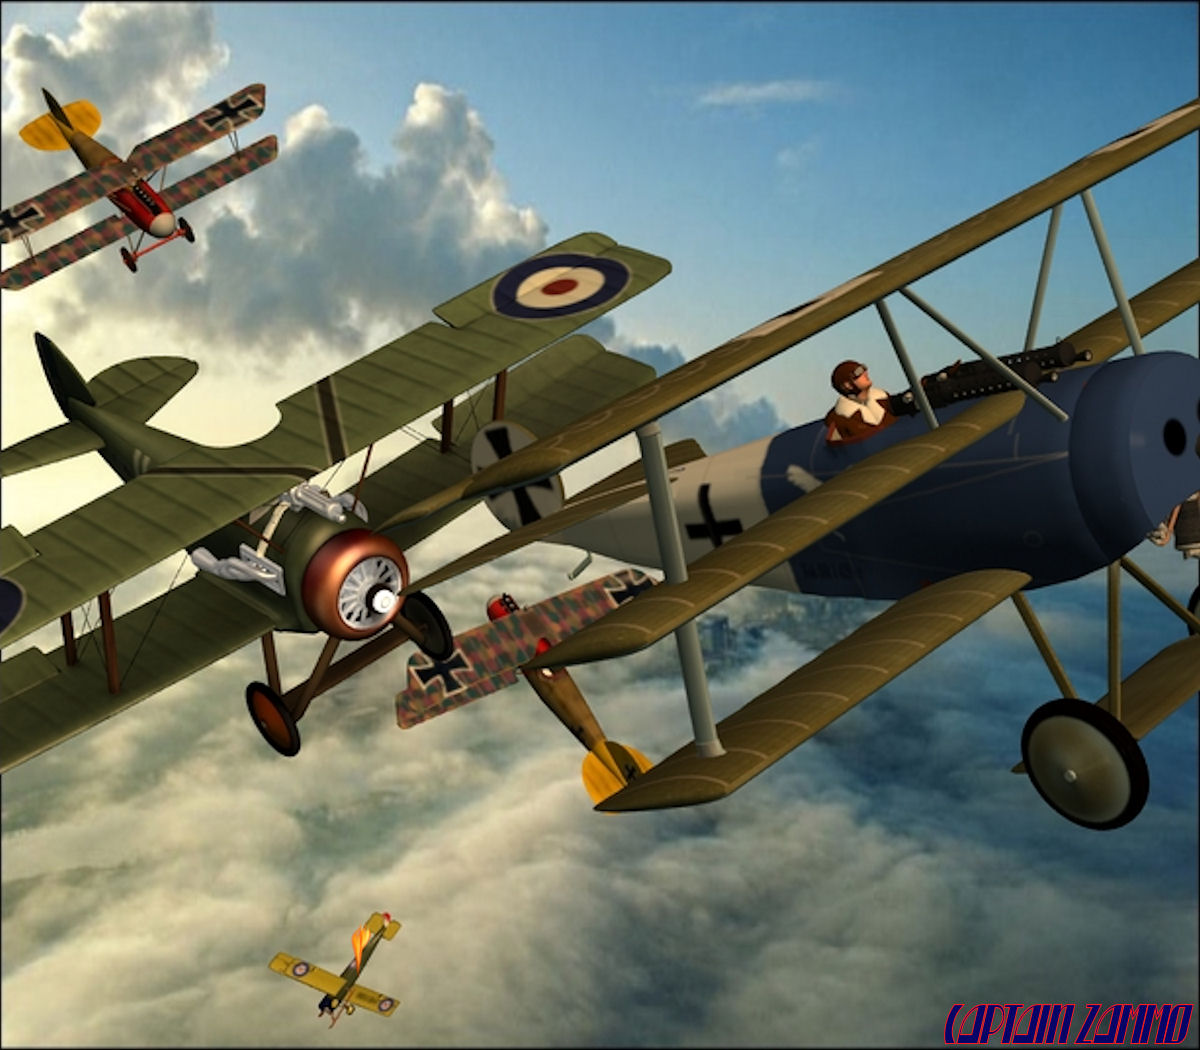 Dogfight by CaptainZammo on DeviantArt